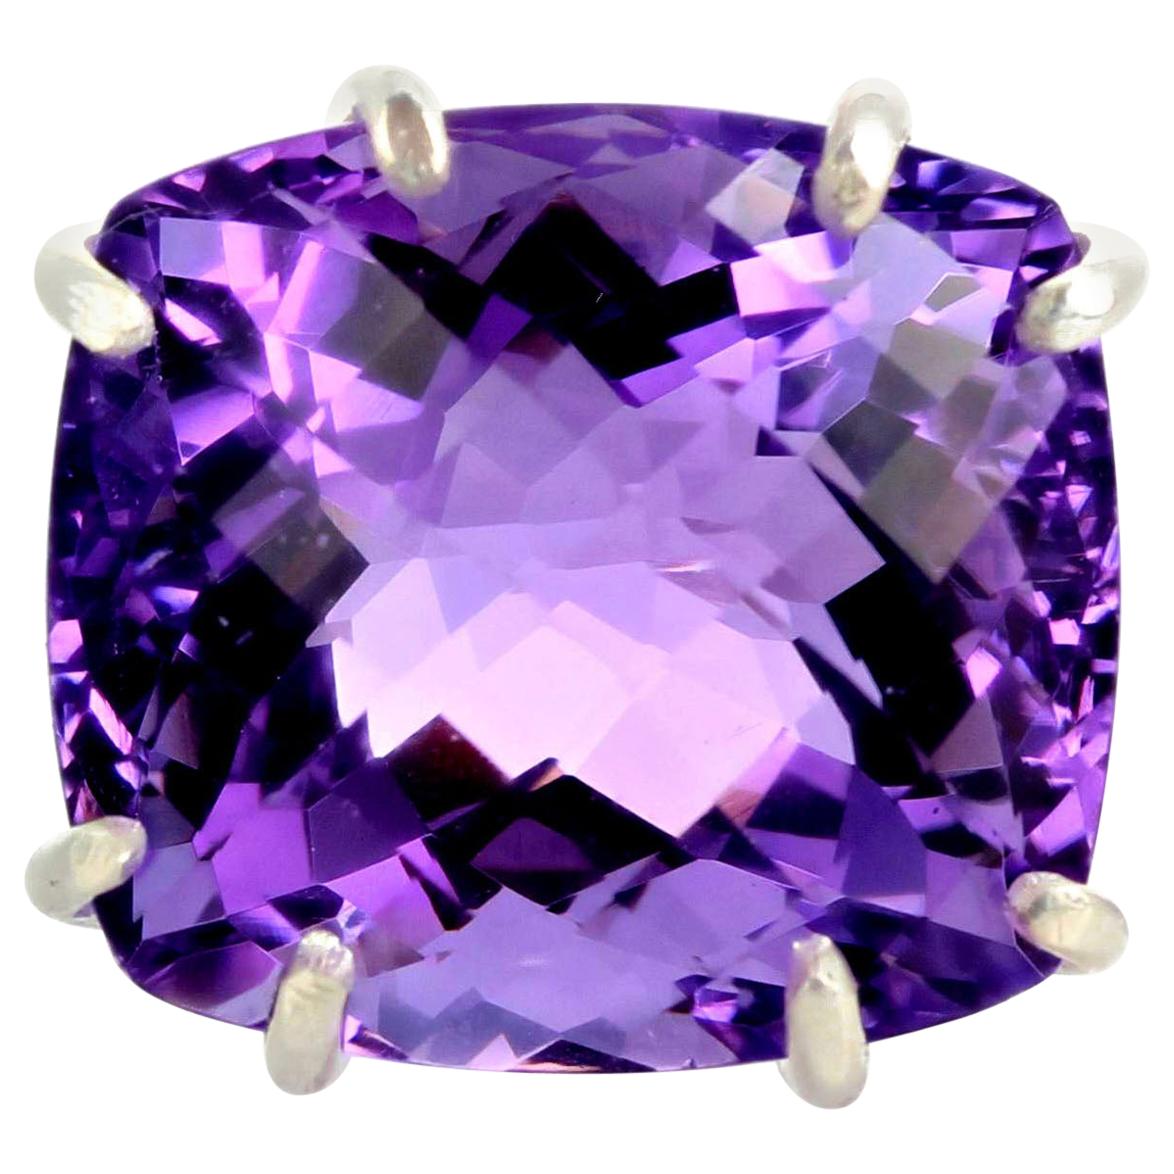 AJD Magnificent Whoppingly Enormous 44 Carat Exquisite Amethyst Silver Ring